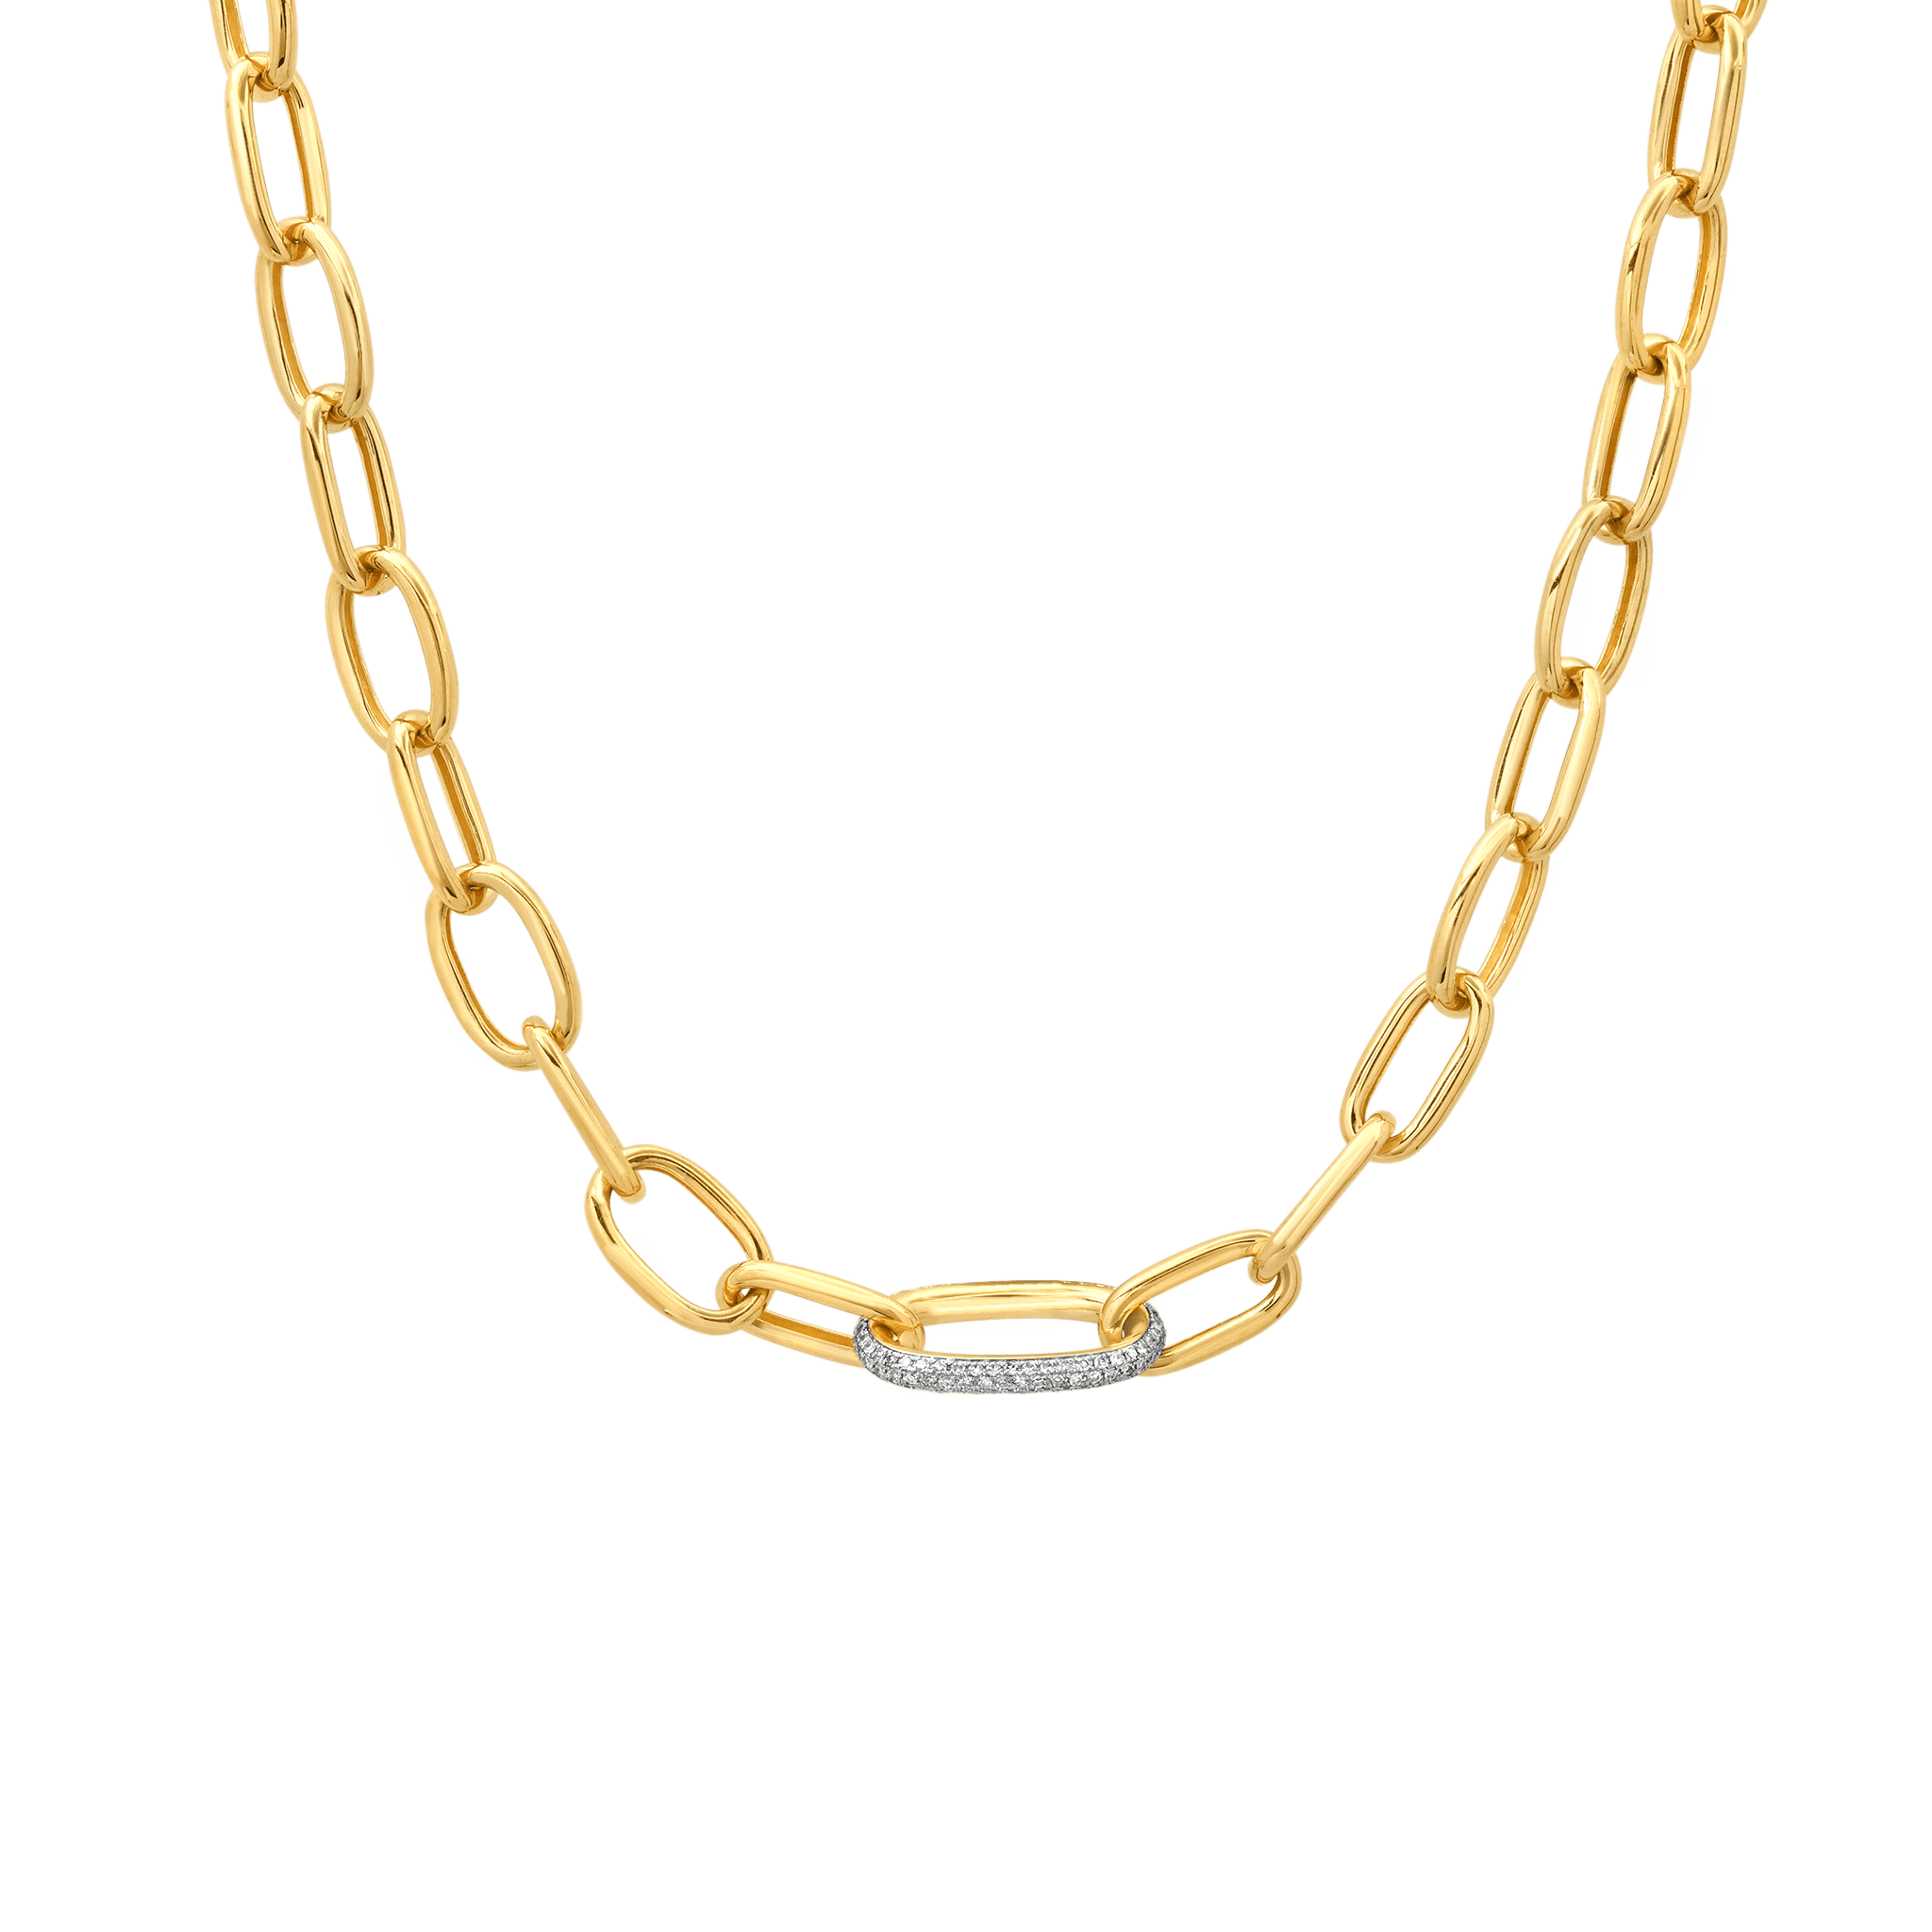 Long Rectangular Chain Necklace with White Pavé Diamond Link